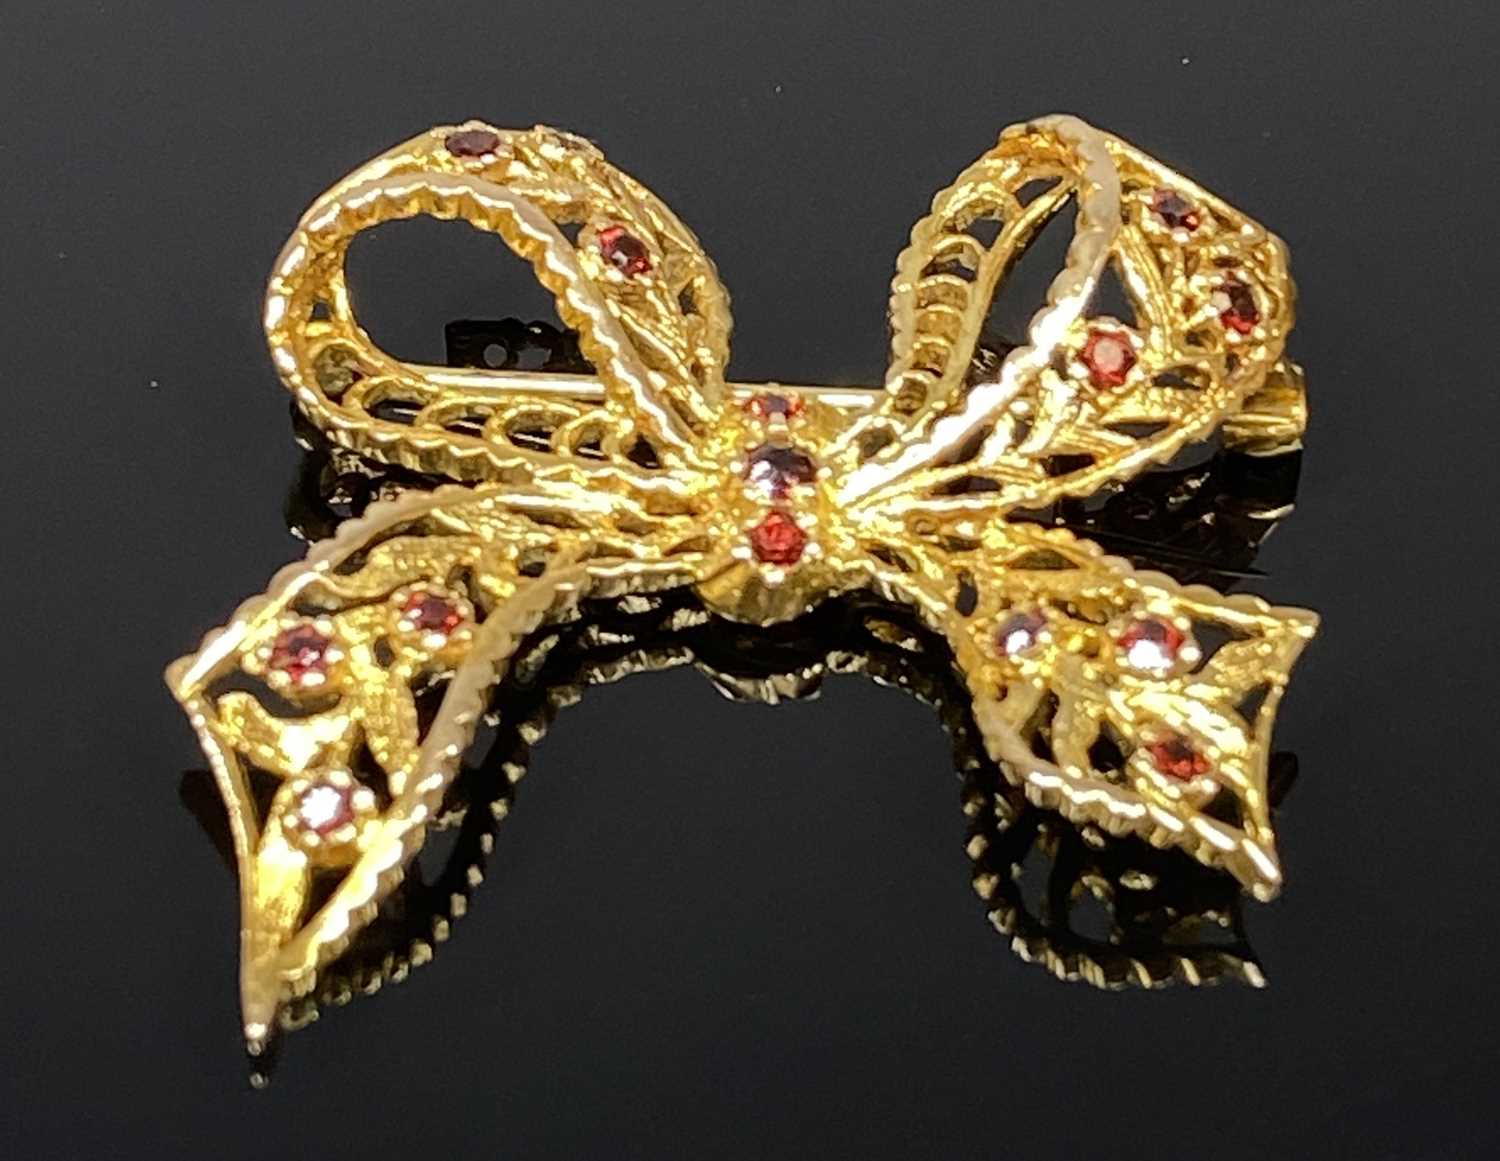 TWO 9CT GOLD GARNET SET BROOCHES, the first with a central pearl, brooch fashioned as a twisted knot - Image 2 of 4